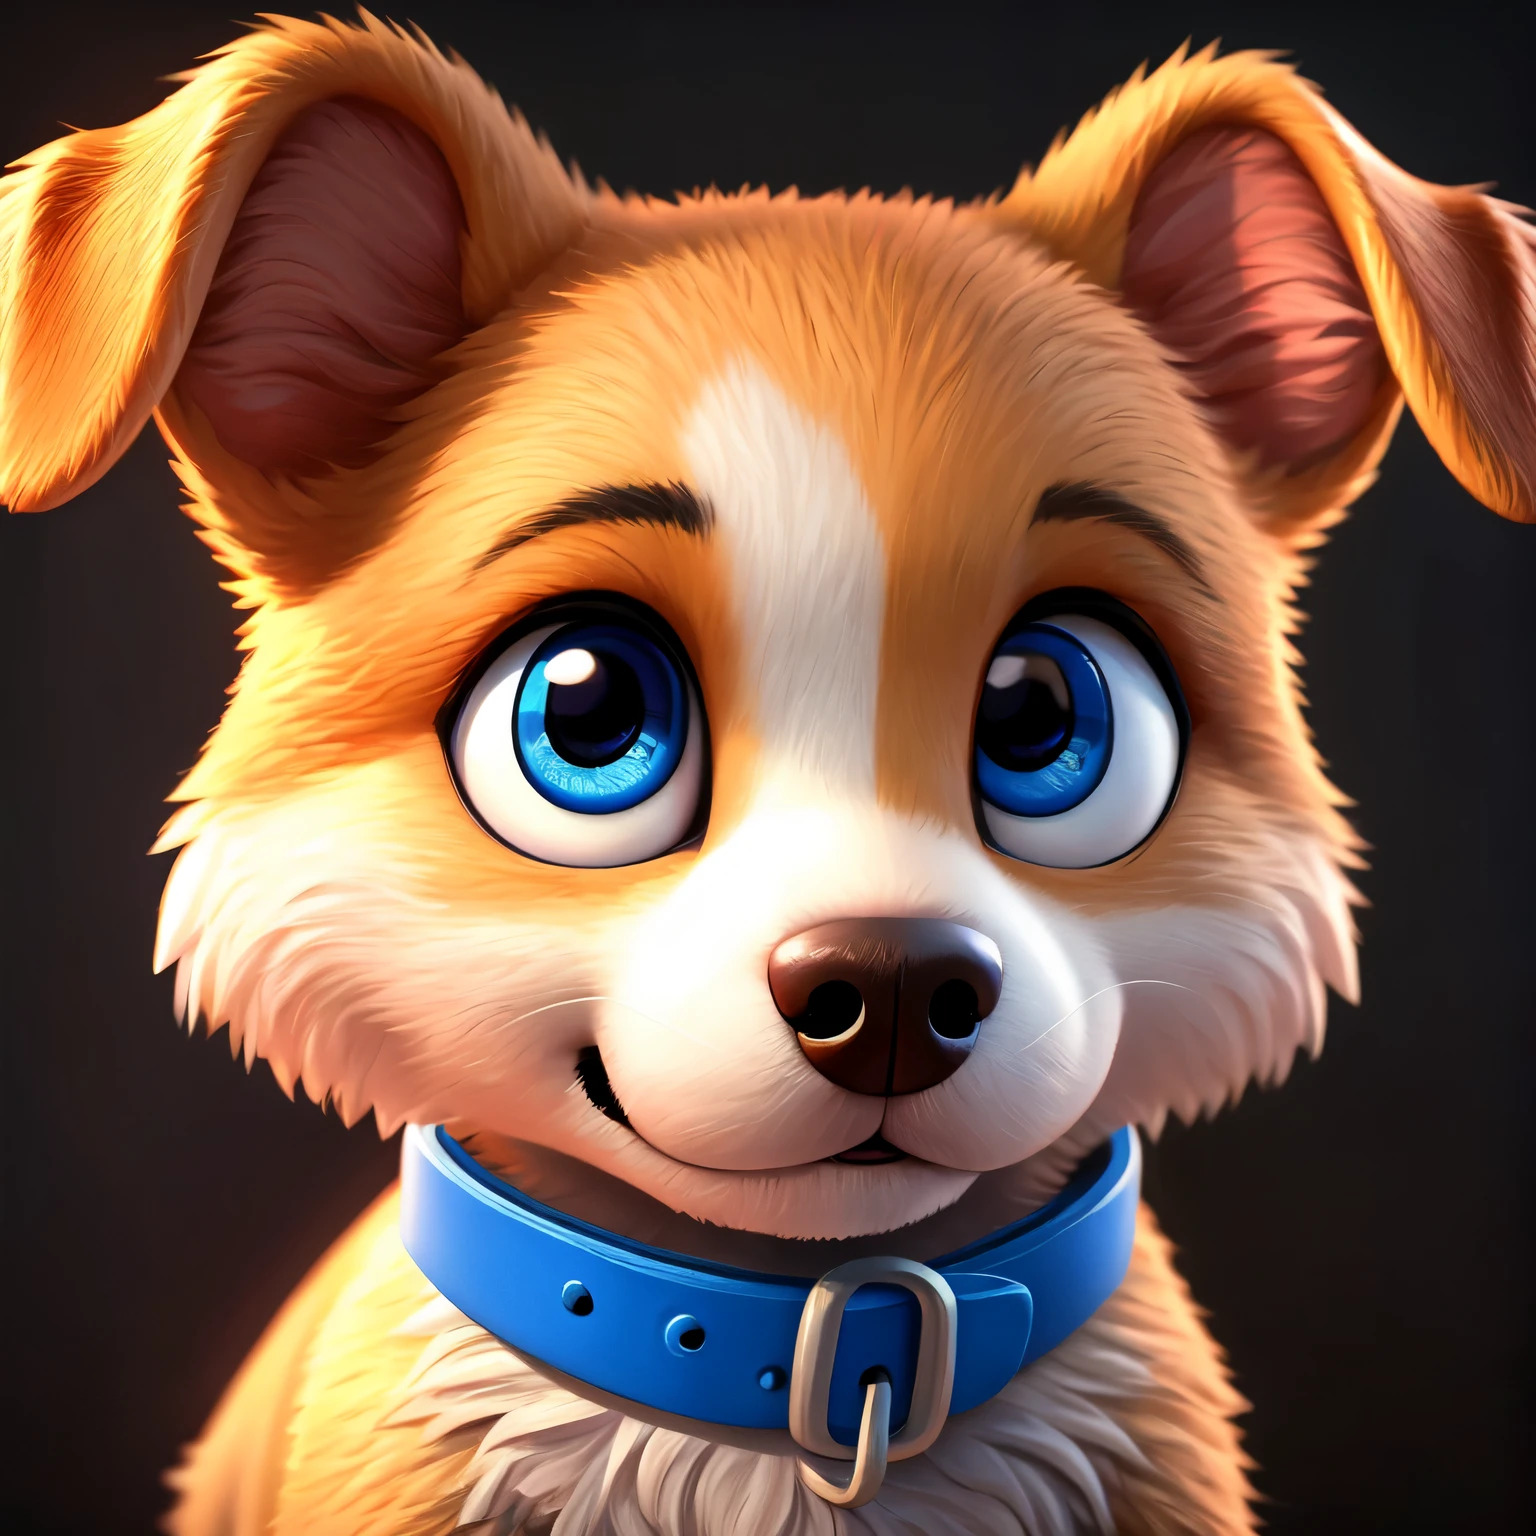 a close up of a very young puppy with blue eyes and a collar, adorable digital painting, cute 3 d render, cute detailed digital art, cute digital art, realistic beautiful big eyes, isometric 3d fantasy cute dog, portrait of a cartoon animal, digital painting highly detailed, 3 d render stylized, ultra realistic 3d illustration, cute puppy, cartoon digital painting.